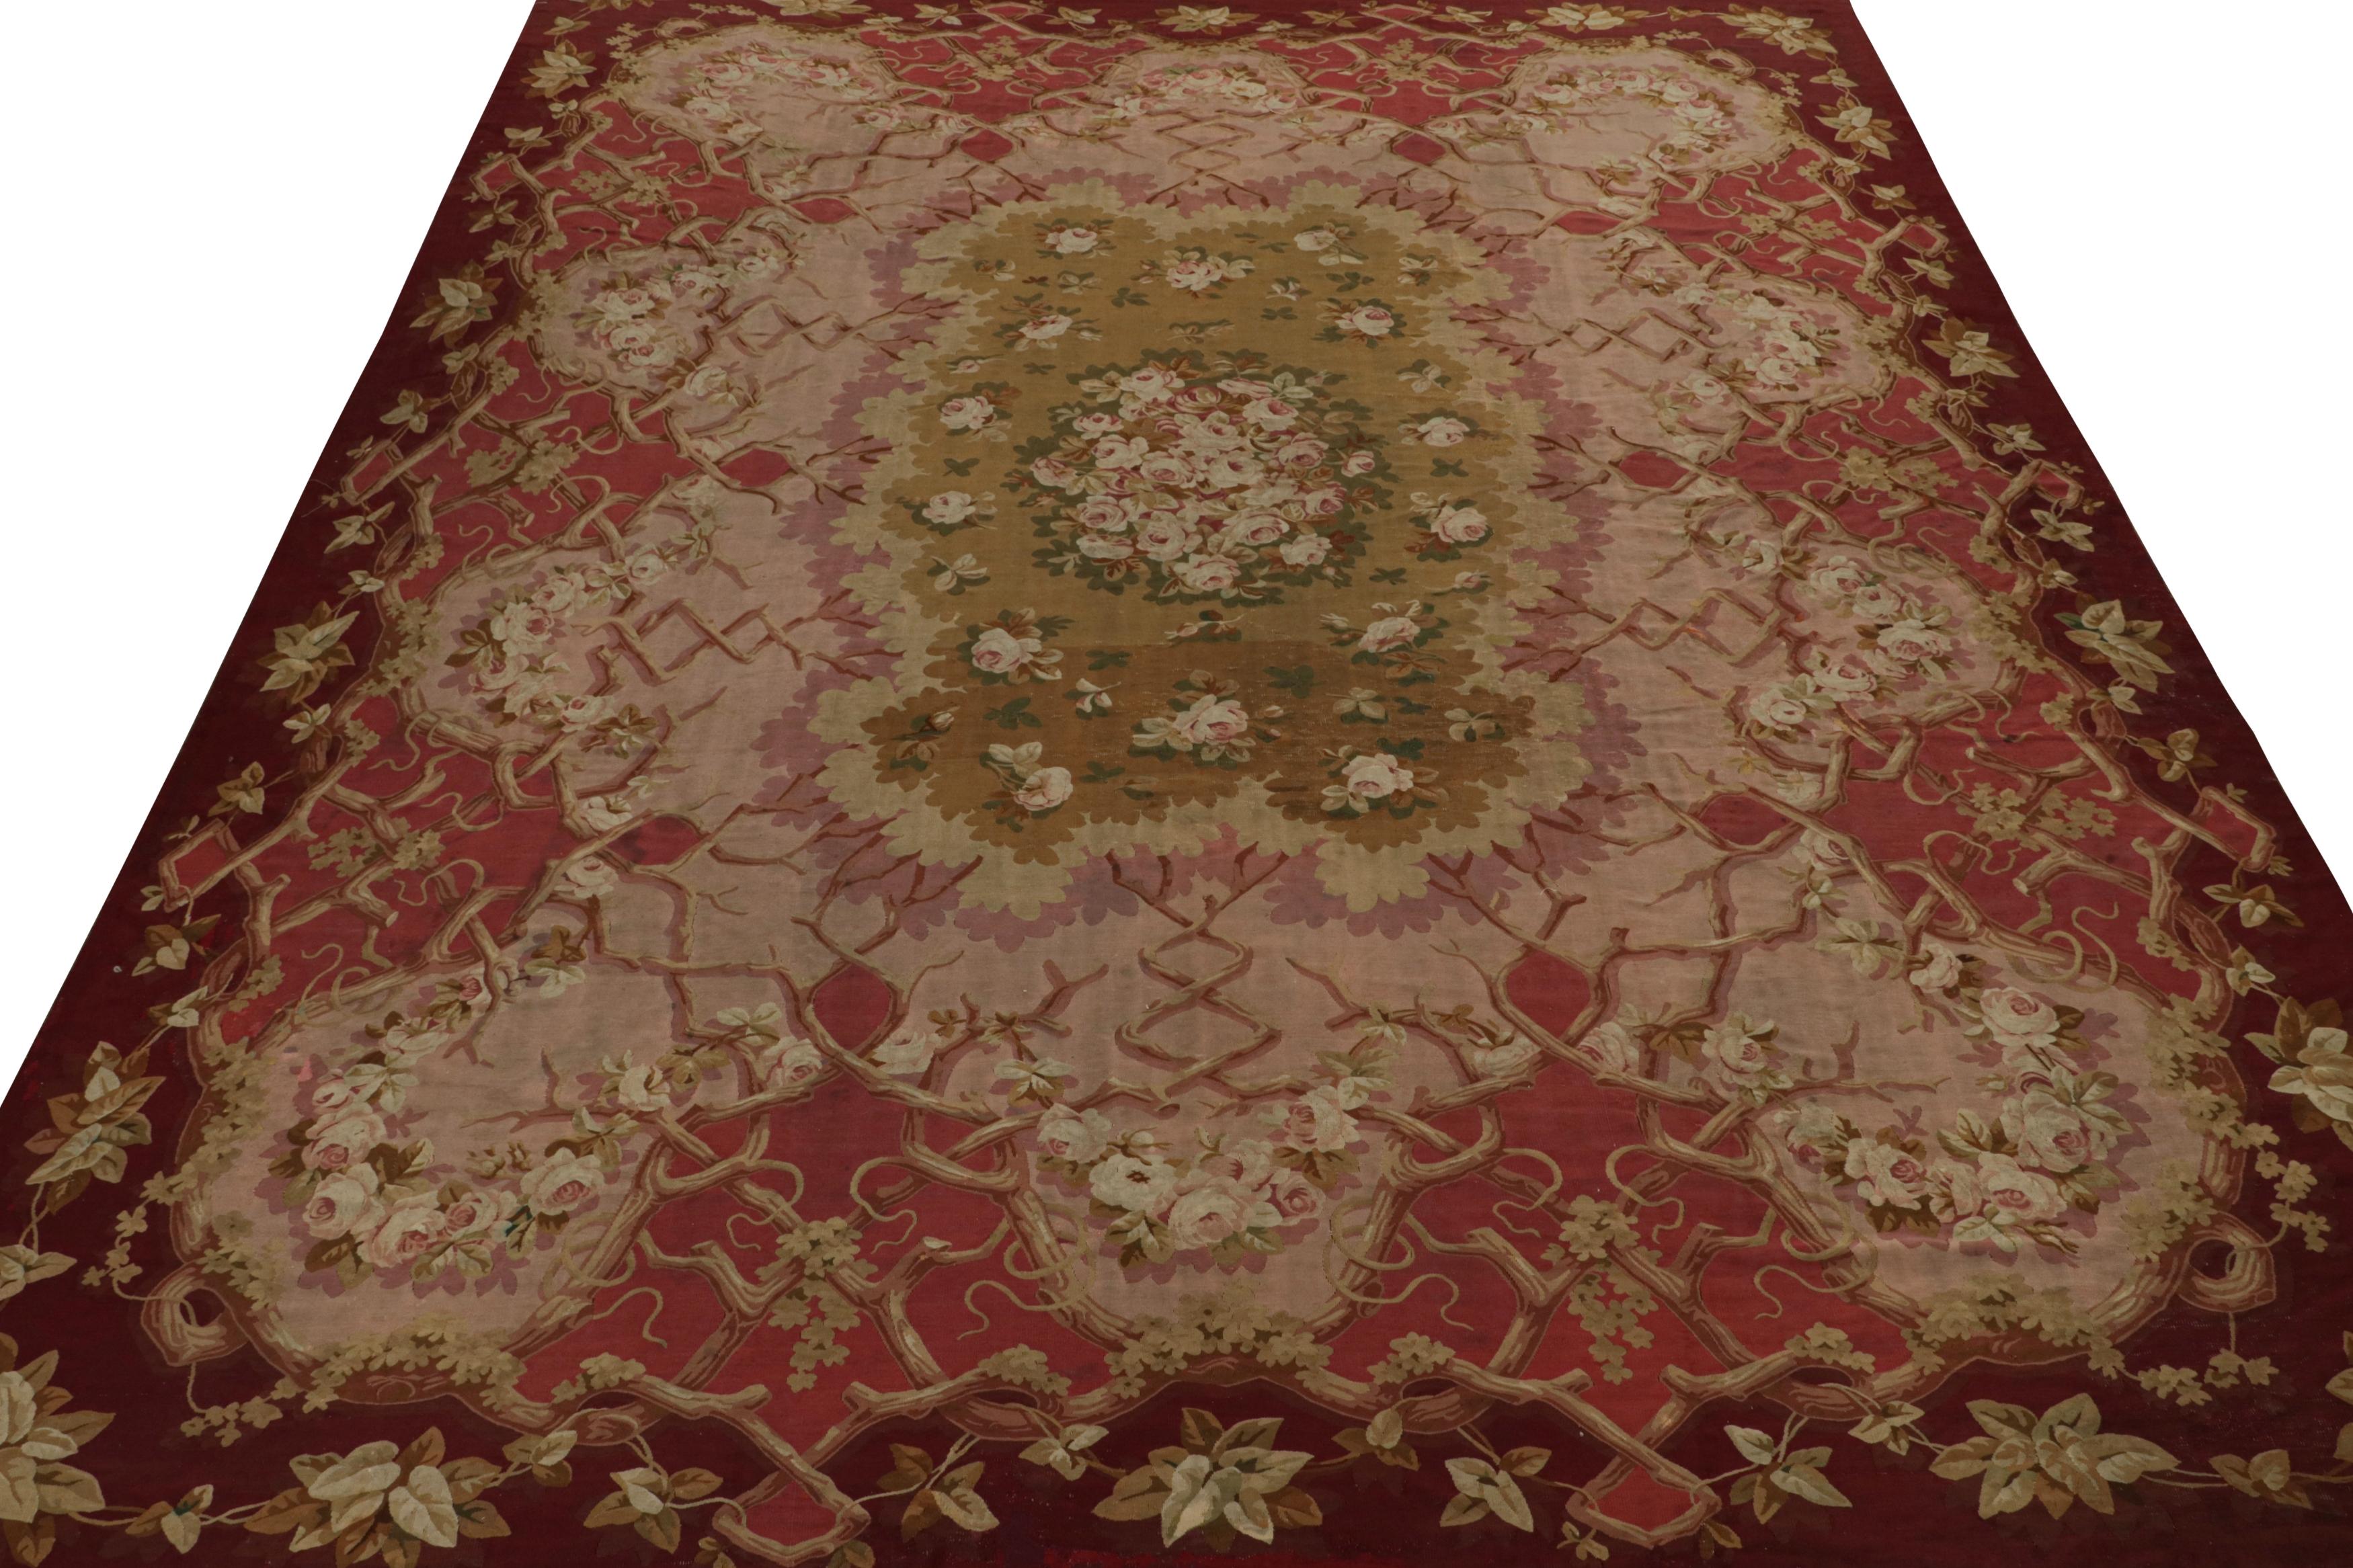 French Antique Aubusson Flatweave Rug in Red with Floral Patterns For Sale